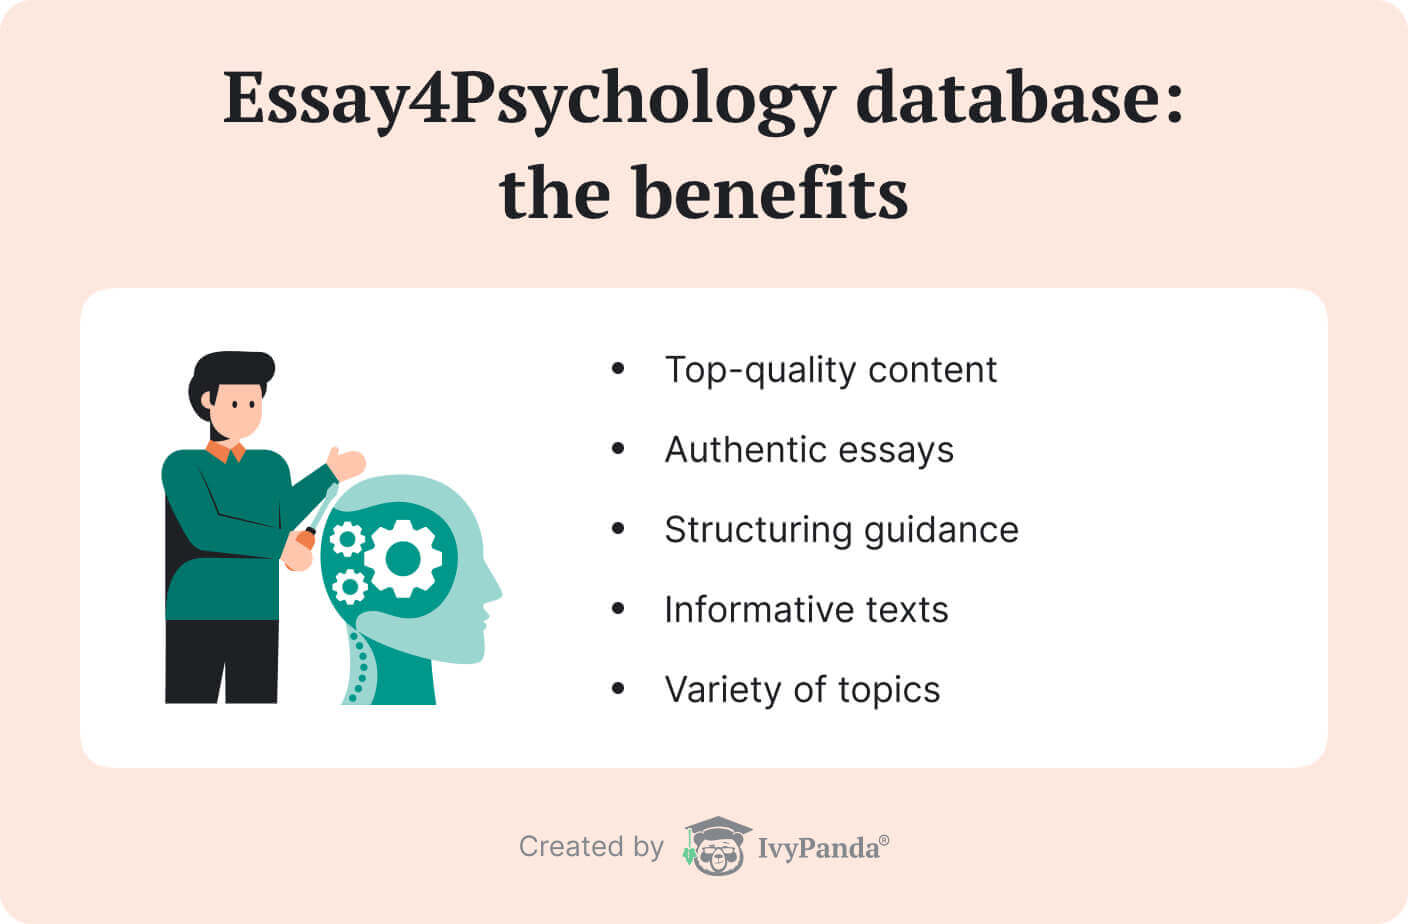 The picture lists the benefits of Essay4Psychology essay database.